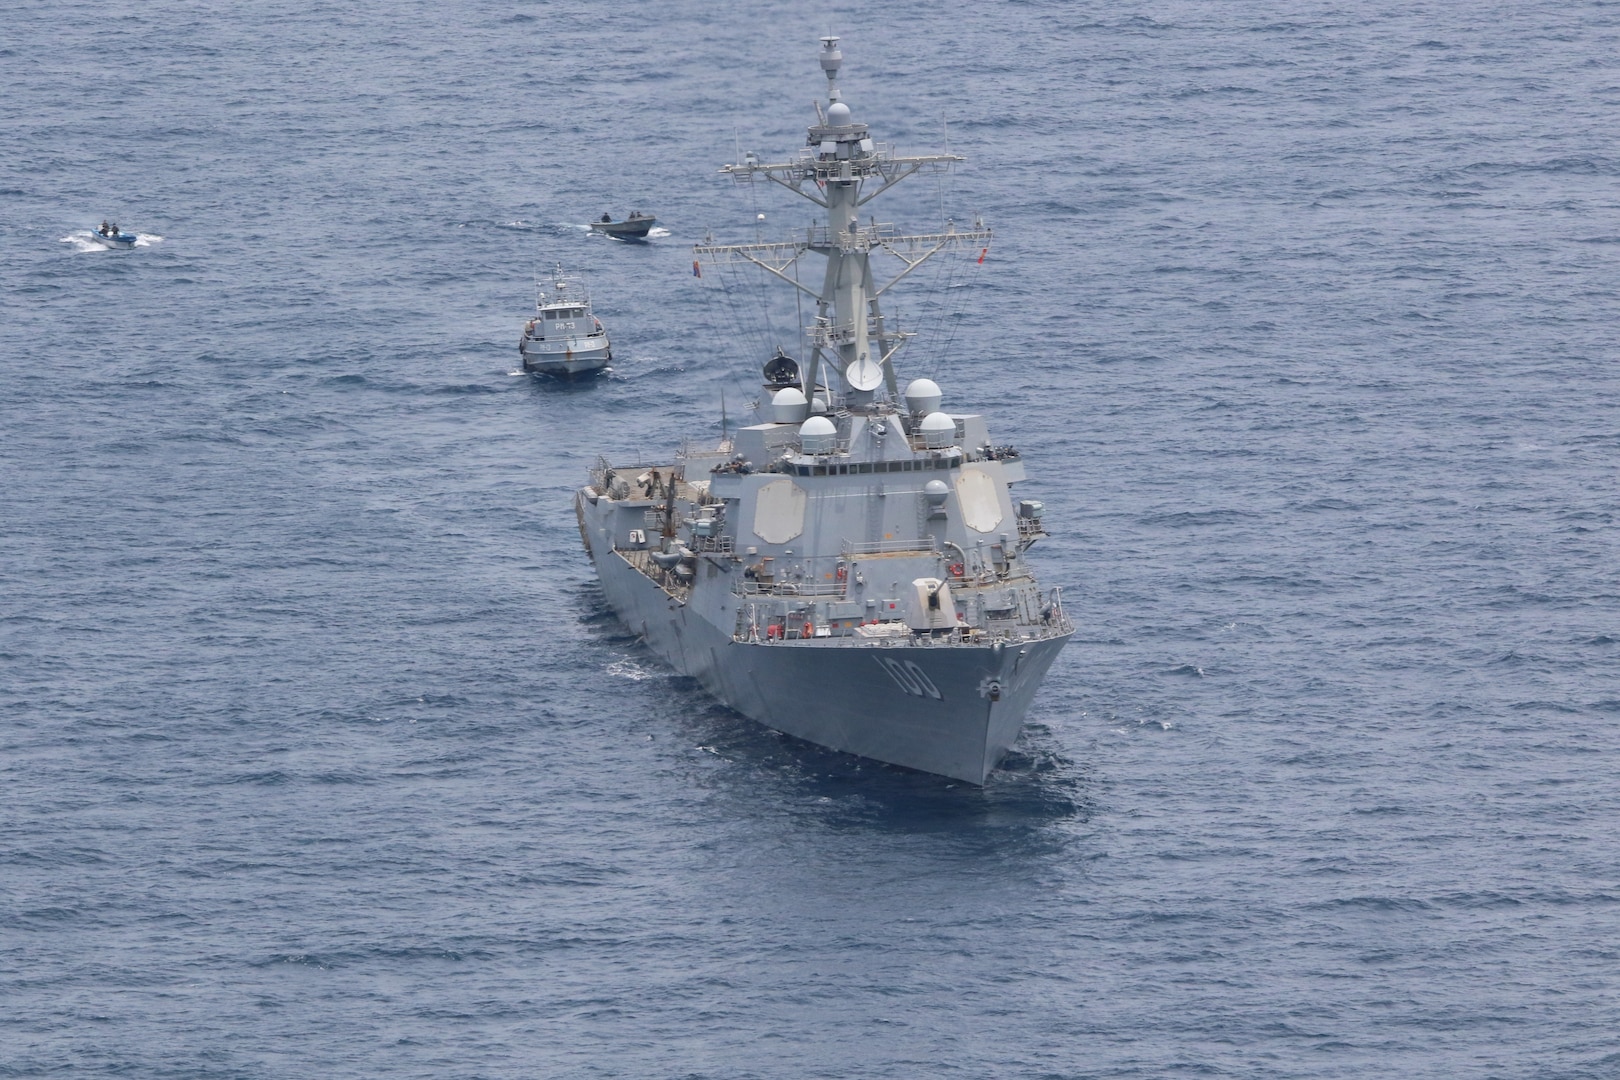 The U.S. Navy Arleigh Burke-class guided-missile destroyer USS Kidd (DDG 100) participates in a passing exercise (PASSEX) with El Salvadoran Navy Maritime Patrol Vessel 13 (PM-13) , July 29, 2020.